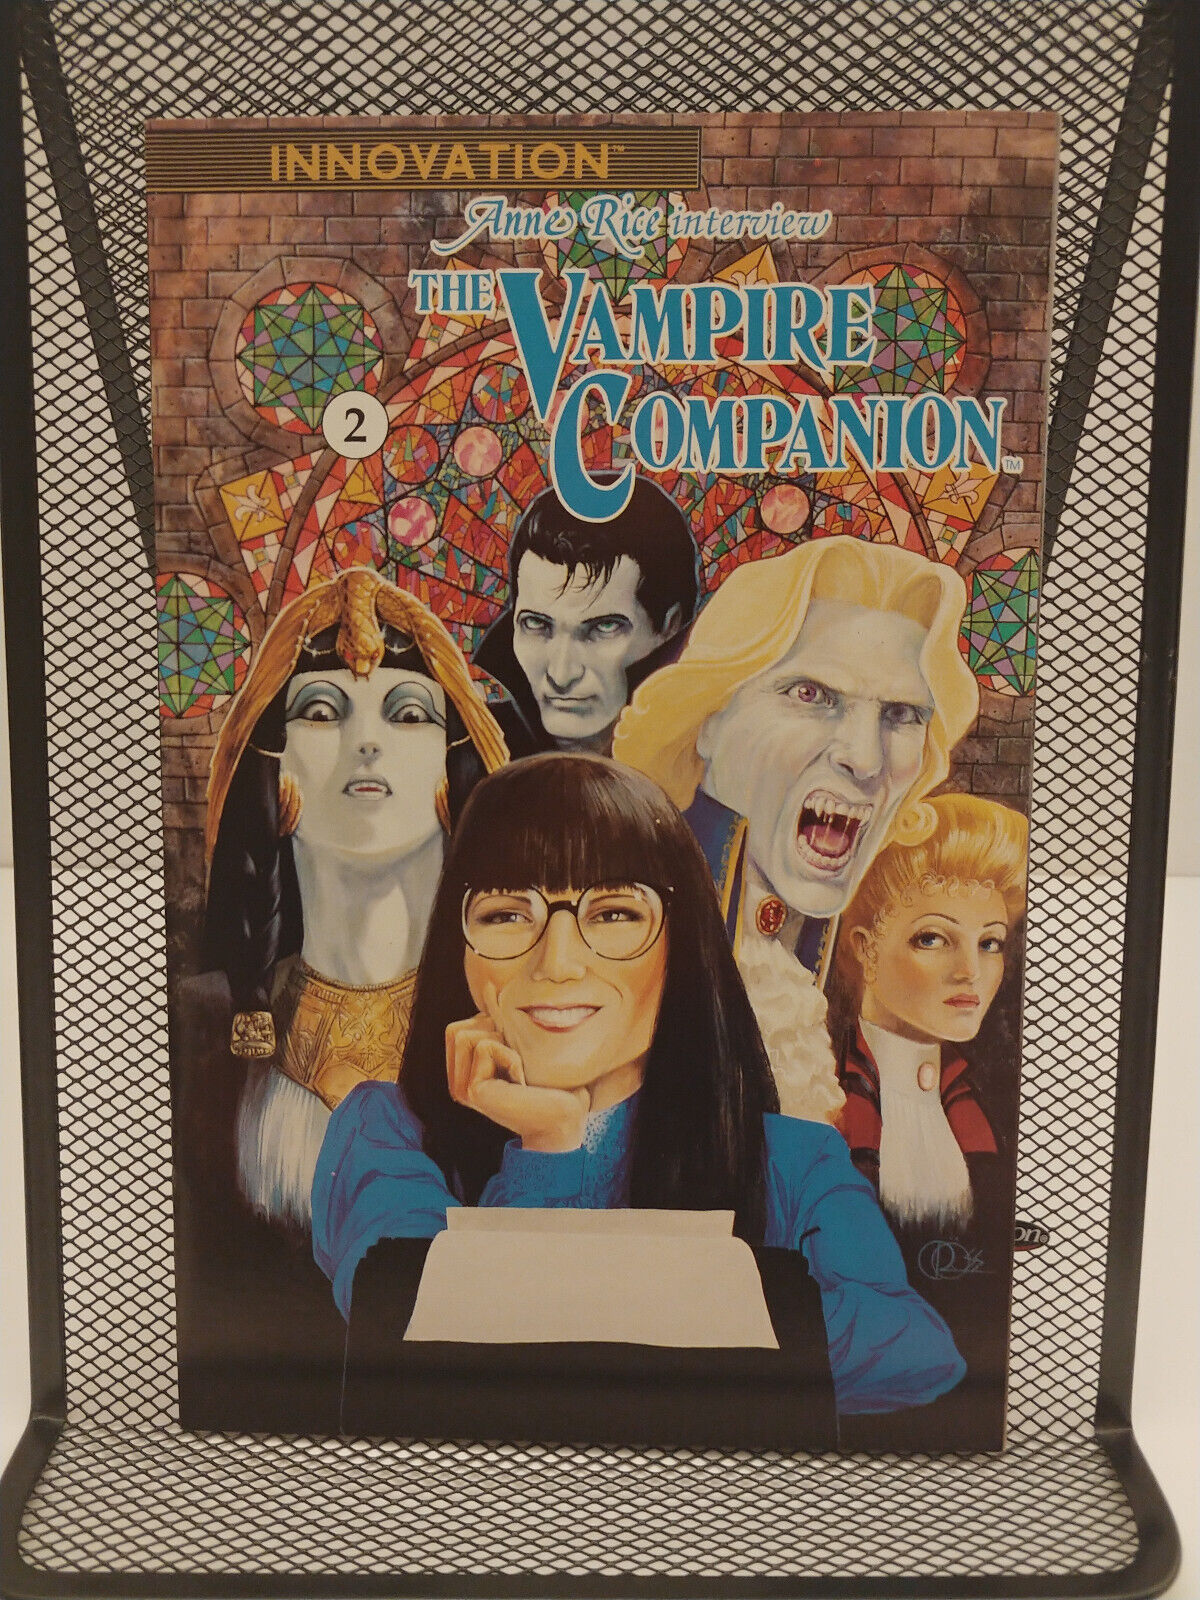 Anne Rice Interview The Vampire Companion #2 (Innovation 1991) vf